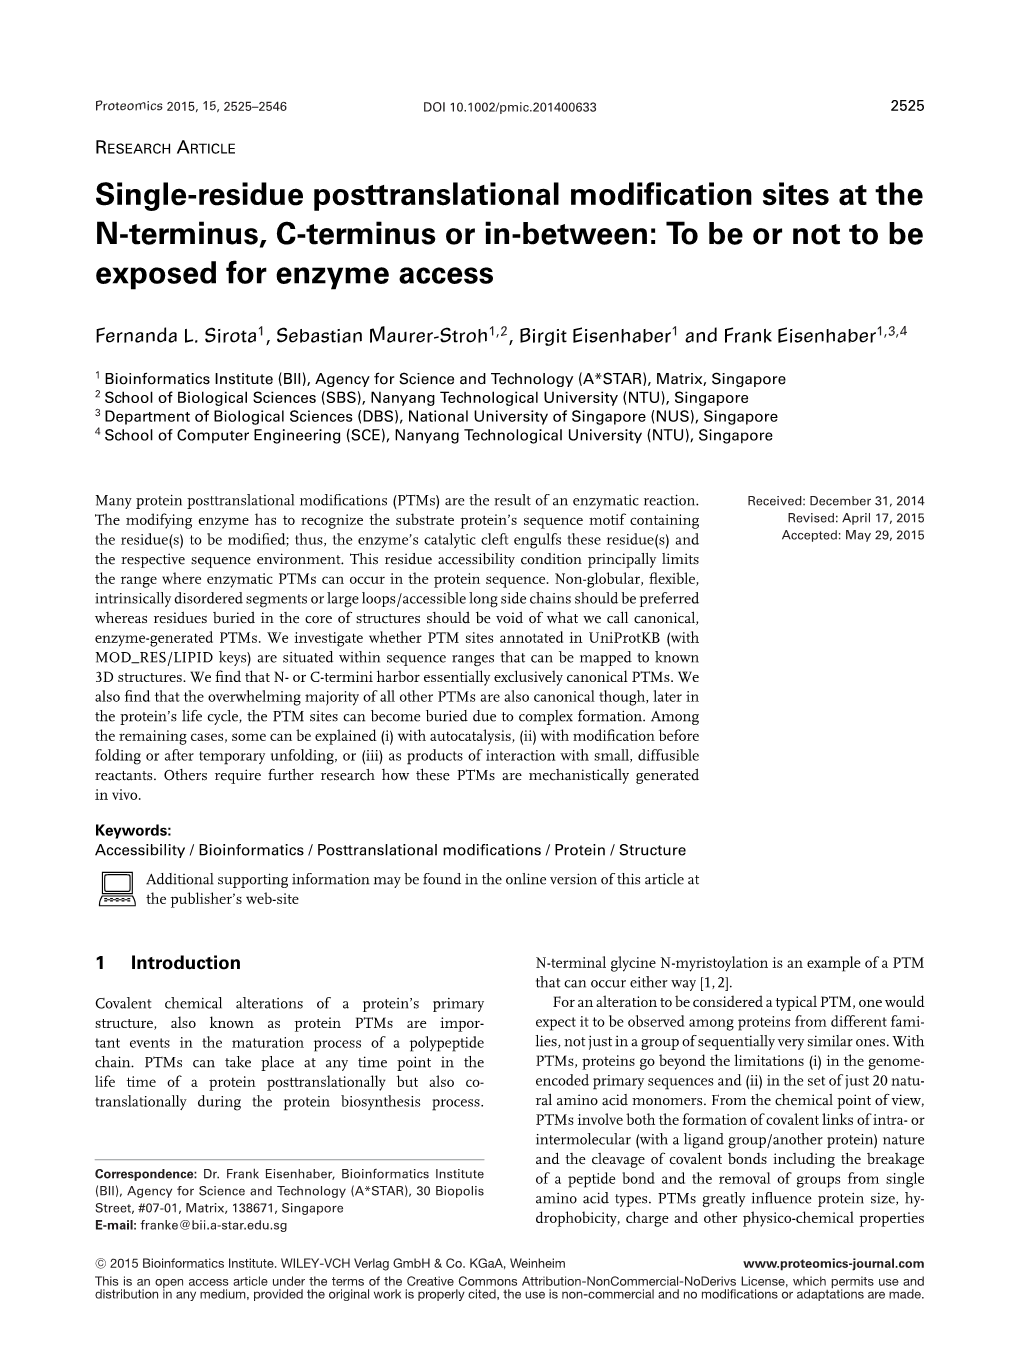 Residue Posttranslational Modification Sites at the N&#X02010